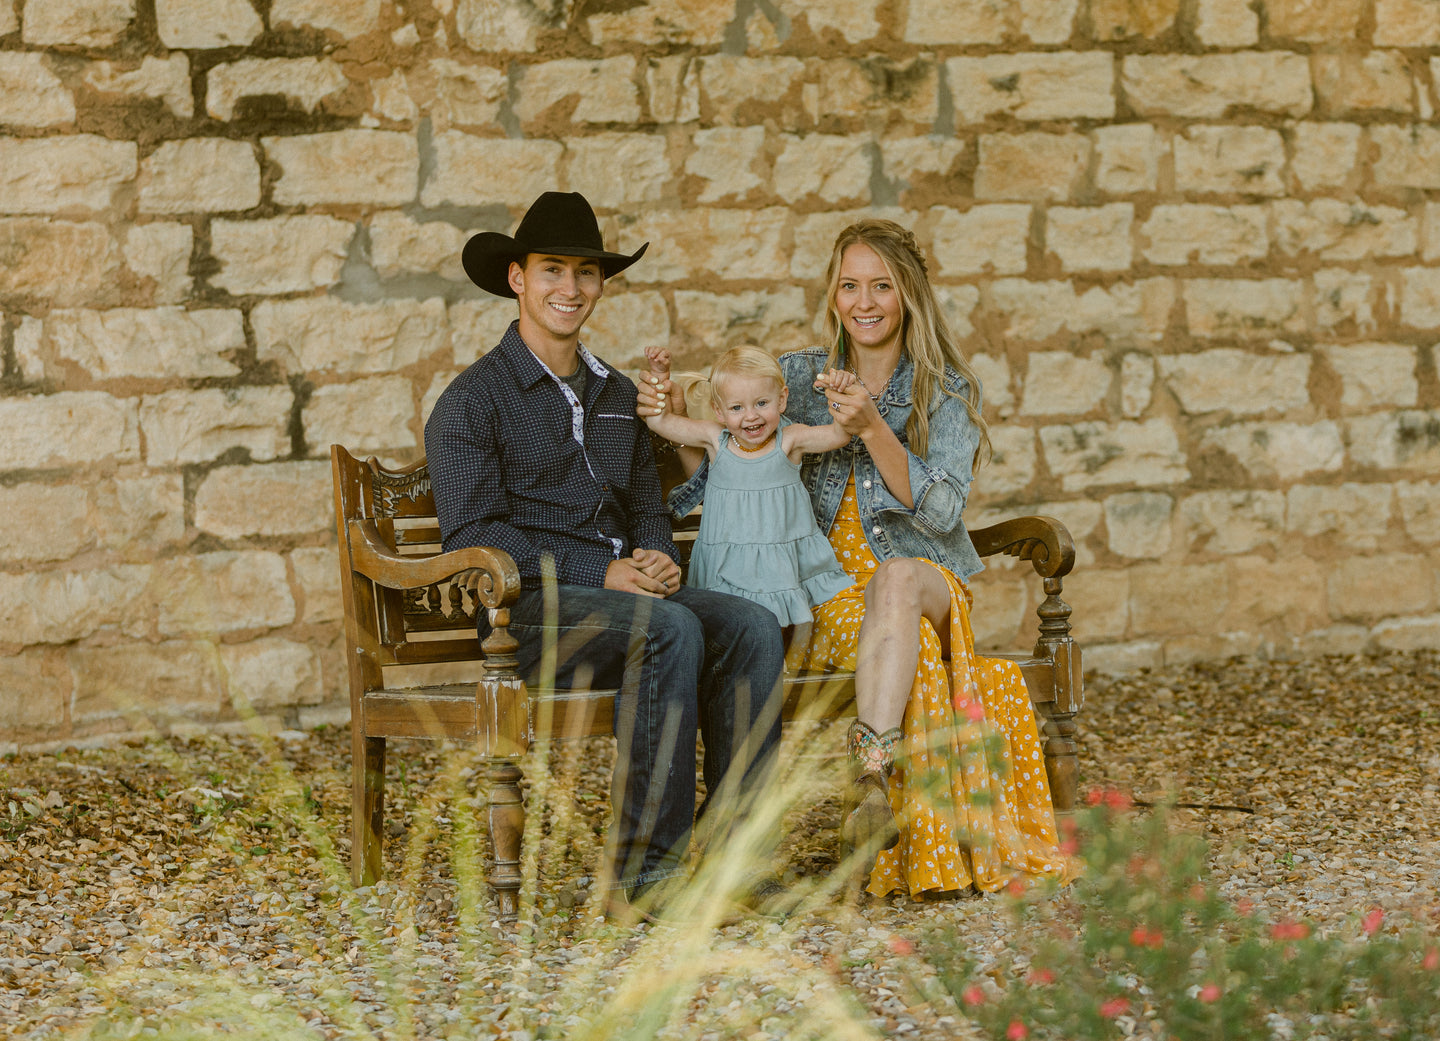 Erik & Laramie Jackson - owners of Fortitude Equine sit with their daughter on a bench